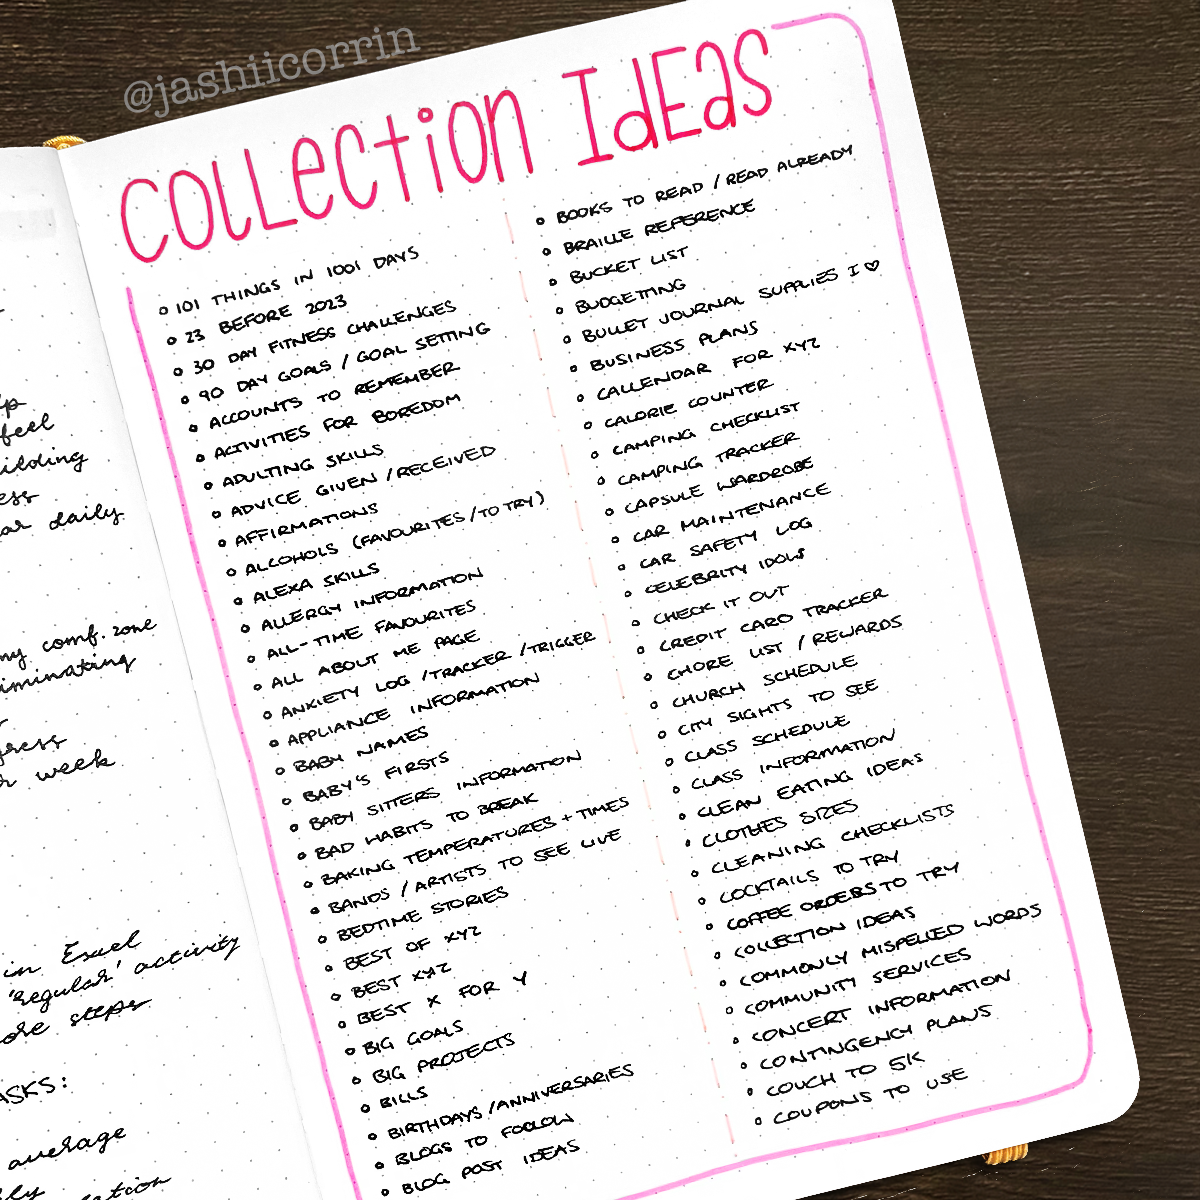 Bullet Journal Collections 101: The What, Why, How & 550+ Bujo